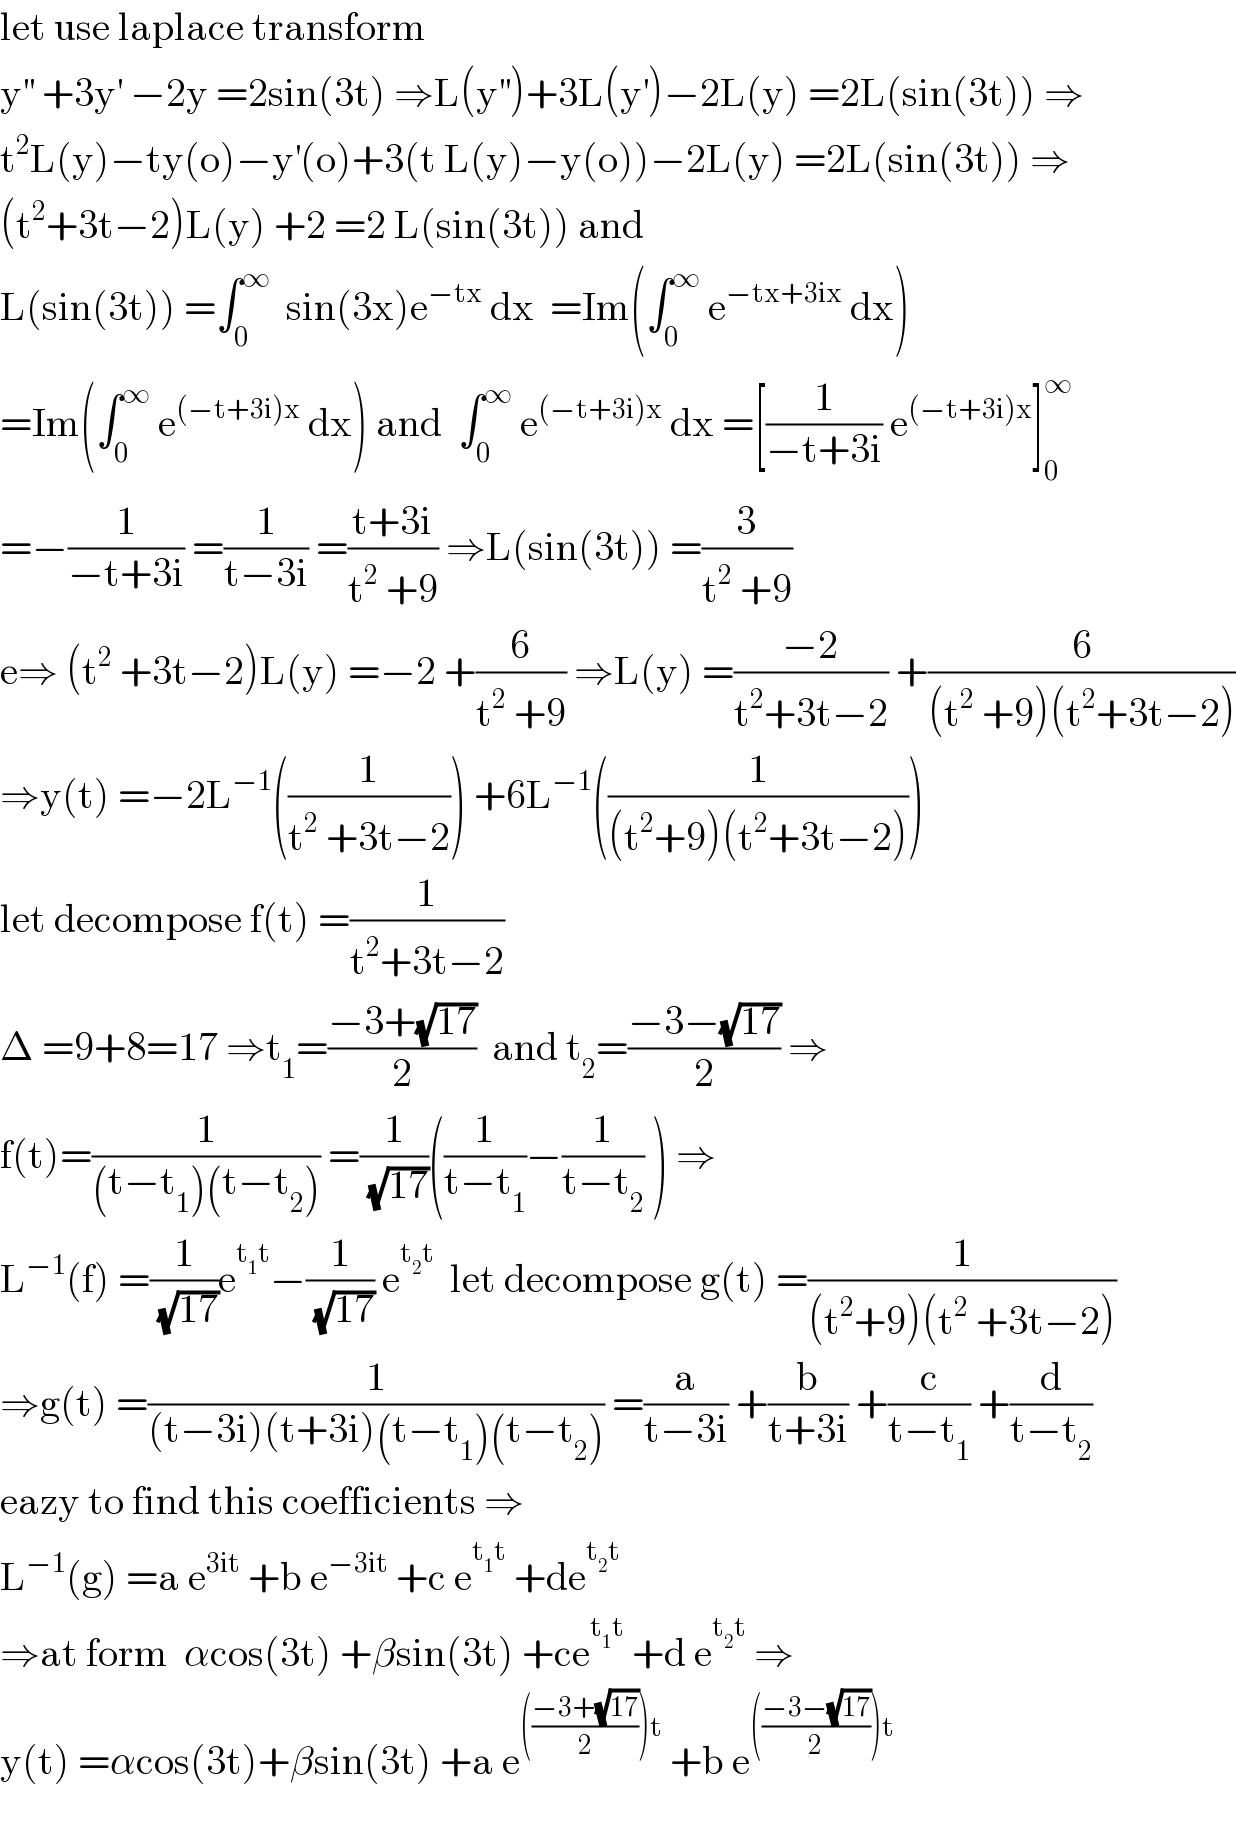 let use laplace transform  y^(′′)  +3y^′  −2y =2sin(3t) ⇒L(y^(′′) )+3L(y^′ )−2L(y) =2L(sin(3t)) ⇒  t^2 L(y)−ty(o)−y^′ (o)+3(t L(y)−y(o))−2L(y) =2L(sin(3t)) ⇒  (t^2 +3t−2)L(y) +2 =2 L(sin(3t)) and  L(sin(3t)) =∫_0 ^∞   sin(3x)e^(−tx)  dx  =Im(∫_0 ^∞  e^(−tx+3ix)  dx)   =Im(∫_0 ^∞  e^((−t+3i)x)  dx) and  ∫_0 ^∞  e^((−t+3i)x)  dx =[(1/(−t+3i)) e^((−t+3i)x) ]_0 ^∞   =−(1/(−t+3i)) =(1/(t−3i)) =((t+3i)/(t^2  +9)) ⇒L(sin(3t)) =(3/(t^2  +9))  e⇒ (t^2  +3t−2)L(y) =−2 +(6/(t^2  +9)) ⇒L(y) =((−2)/(t^2 +3t−2)) +(6/((t^2  +9)(t^2 +3t−2)))  ⇒y(t) =−2L^(−1) ((1/(t^2  +3t−2))) +6L^(−1) ((1/((t^2 +9)(t^2 +3t−2))))  let decompose f(t) =(1/(t^2 +3t−2))  Δ =9+8=17 ⇒t_1 =((−3+(√(17)))/2)  and t_2 =((−3−(√(17)))/2) ⇒  f(t)=(1/((t−t_1 )(t−t_2 ))) =(1/(√(17)))((1/(t−t_1 ))−(1/(t−t_2 )) ) ⇒  L^(−1) (f) =(1/(√(17)))e^(t_1 t) −(1/(√(17))) e^(t_2 t)   let decompose g(t) =(1/((t^2 +9)(t^2  +3t−2)))  ⇒g(t) =(1/((t−3i)(t+3i)(t−t_1 )(t−t_2 ))) =(a/(t−3i)) +(b/(t+3i)) +(c/(t−t_1 )) +(d/(t−t_2 ))  eazy to find this coefficients ⇒  L^(−1) (g) =a e^(3it)  +b e^(−3it)  +c e^(t_1 t)  +de^(t_2 t)   ⇒at form  αcos(3t) +βsin(3t) +ce^(t_1 t)  +d e^(t_2 t)  ⇒  y(t) =αcos(3t)+βsin(3t) +a e^((((−3+(√(17)))/2))t)  +b e^((((−3−(√(17)))/2))t)     